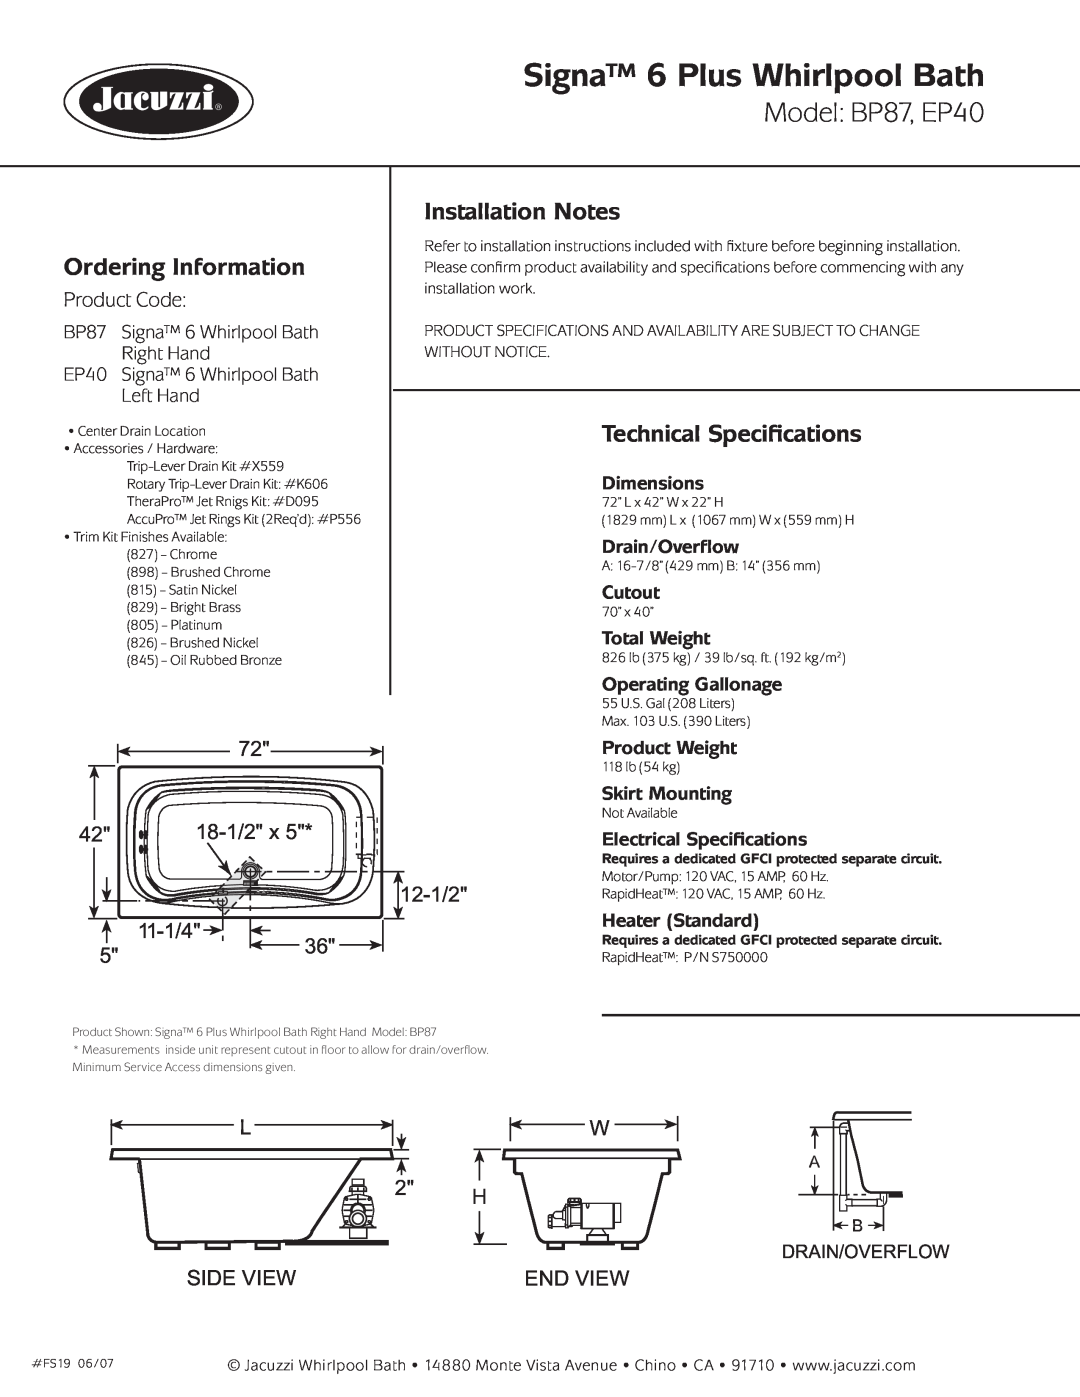 Jacuzzi dimensions Signa 6 Plus Whirlpool Bath, Model BP87, EP40, Ordering Information, Installation Notes 